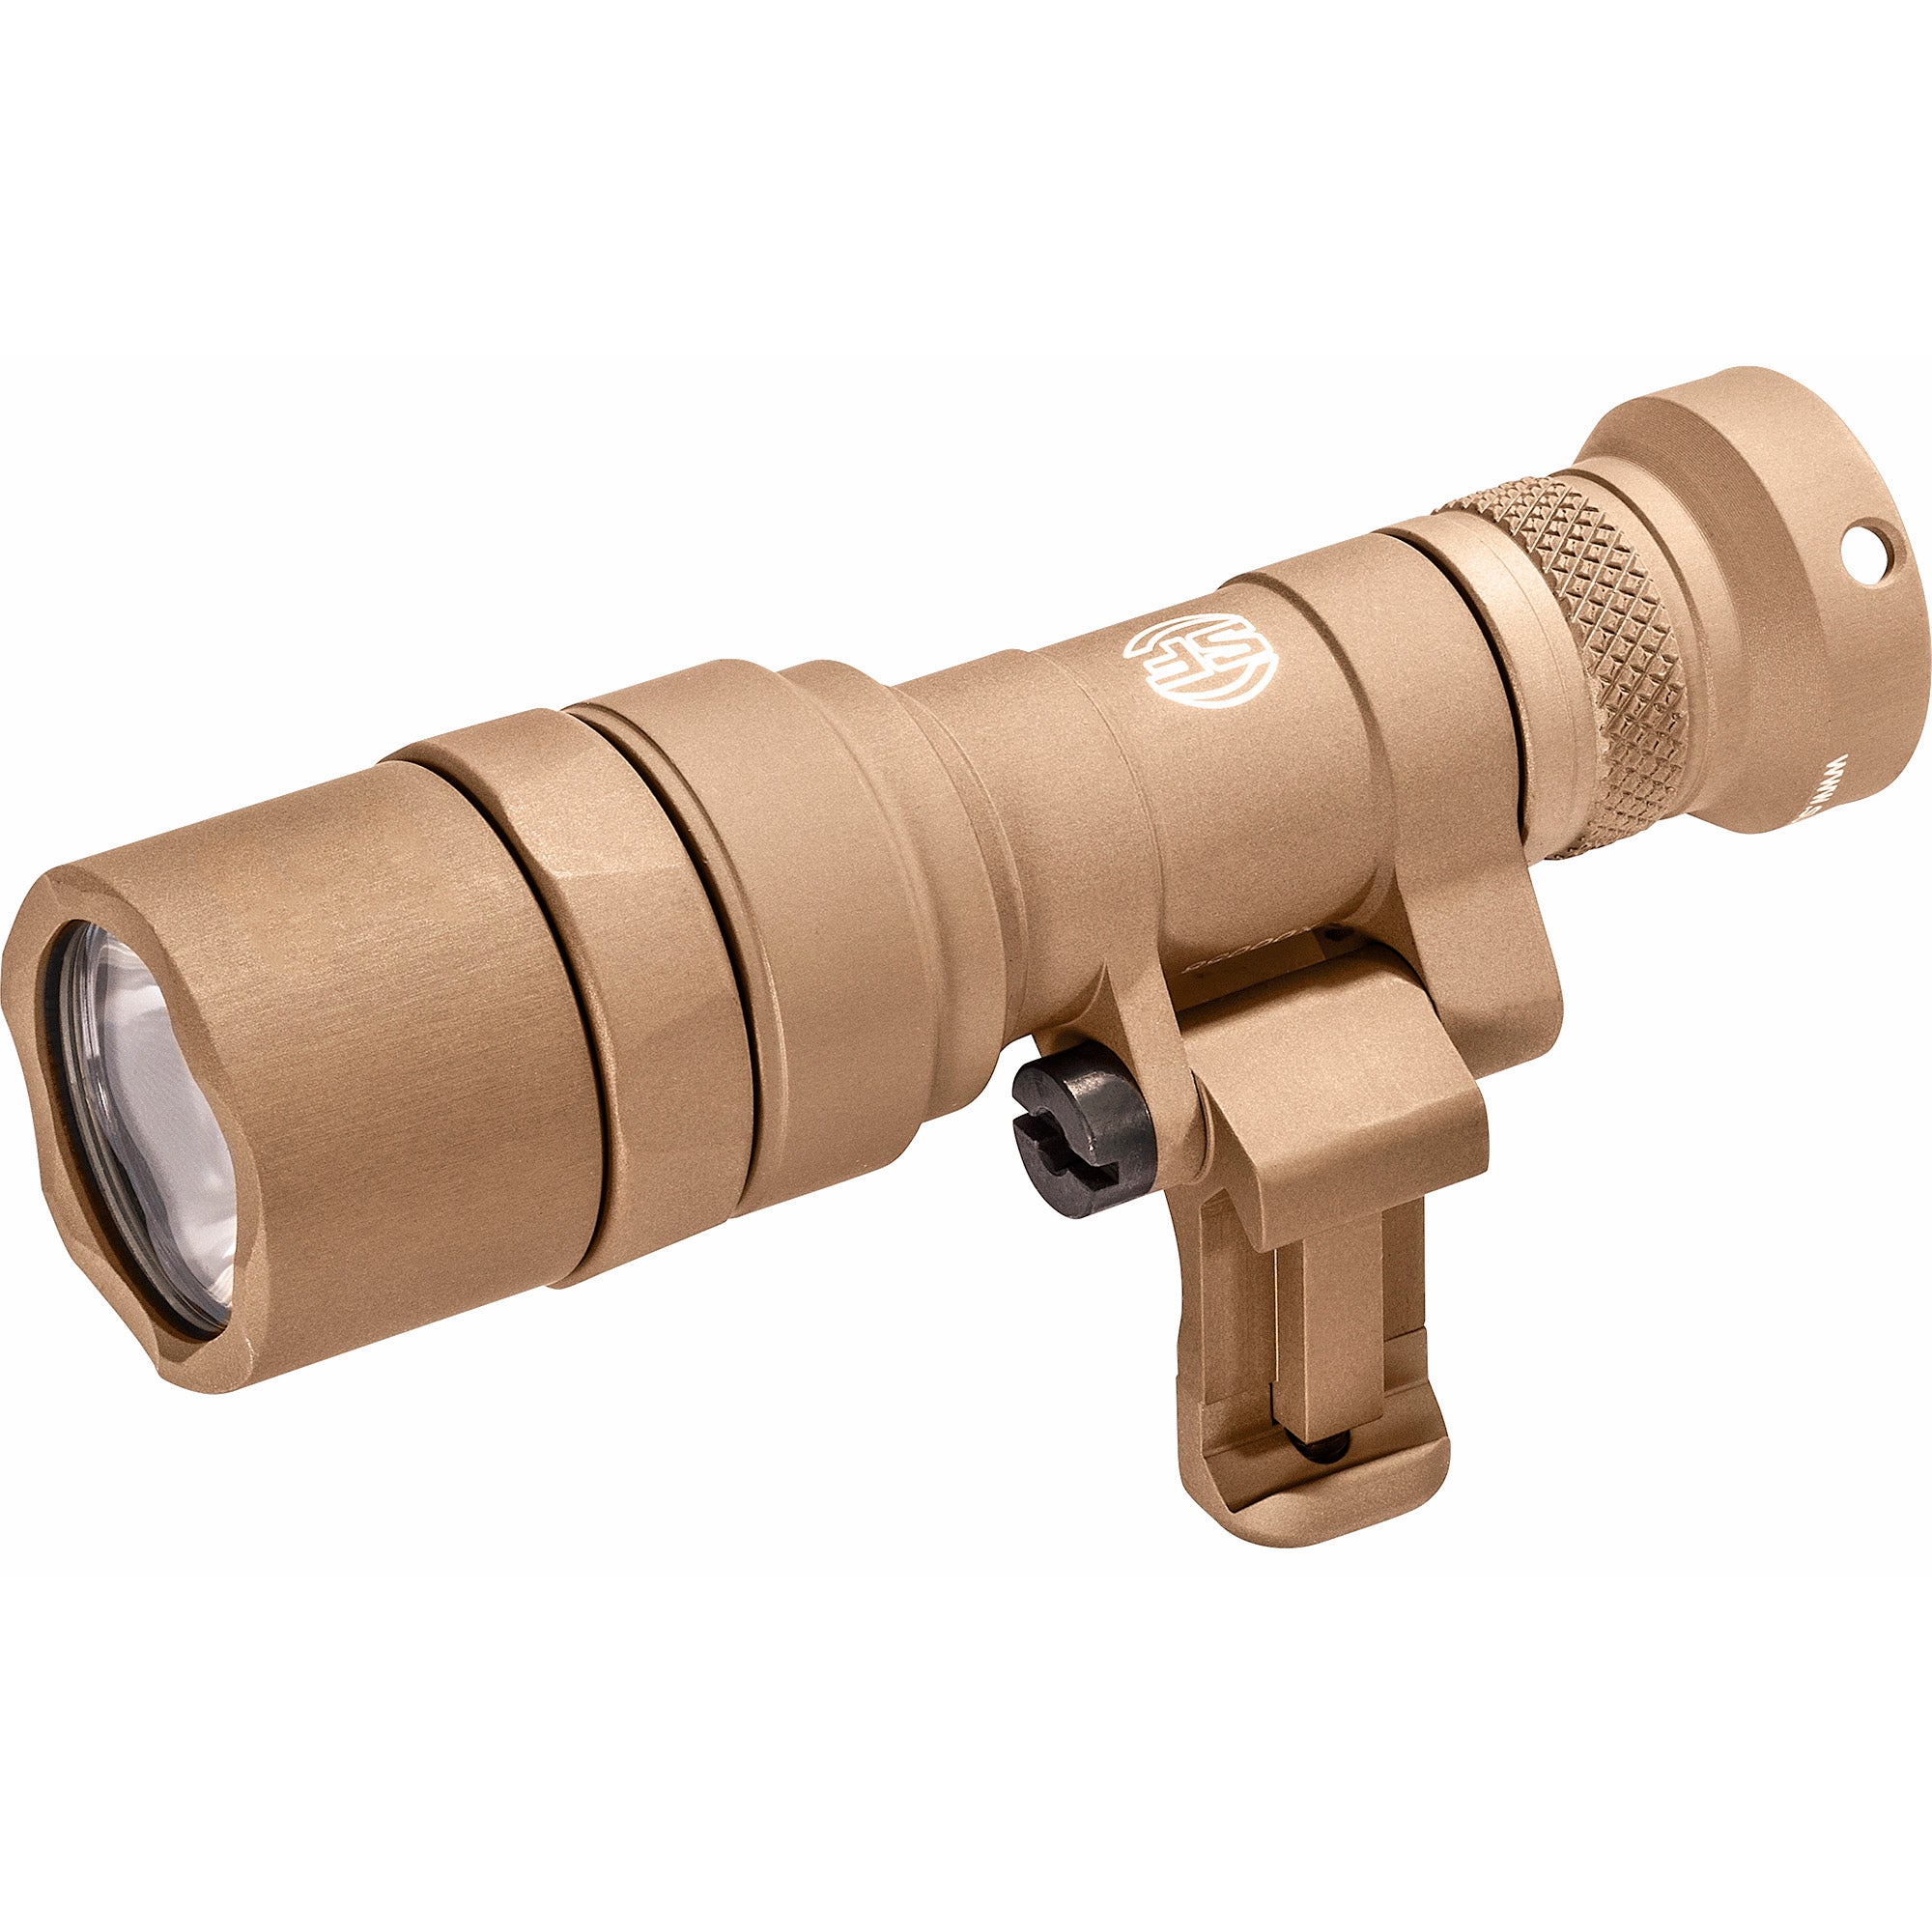 Surefire M340C Scout Pro Flashlight in tan finish, 500 lumens, equipped with 1913 Picatinny and M-LOK mounts, and featuring a Z68 On/Off tailcap.